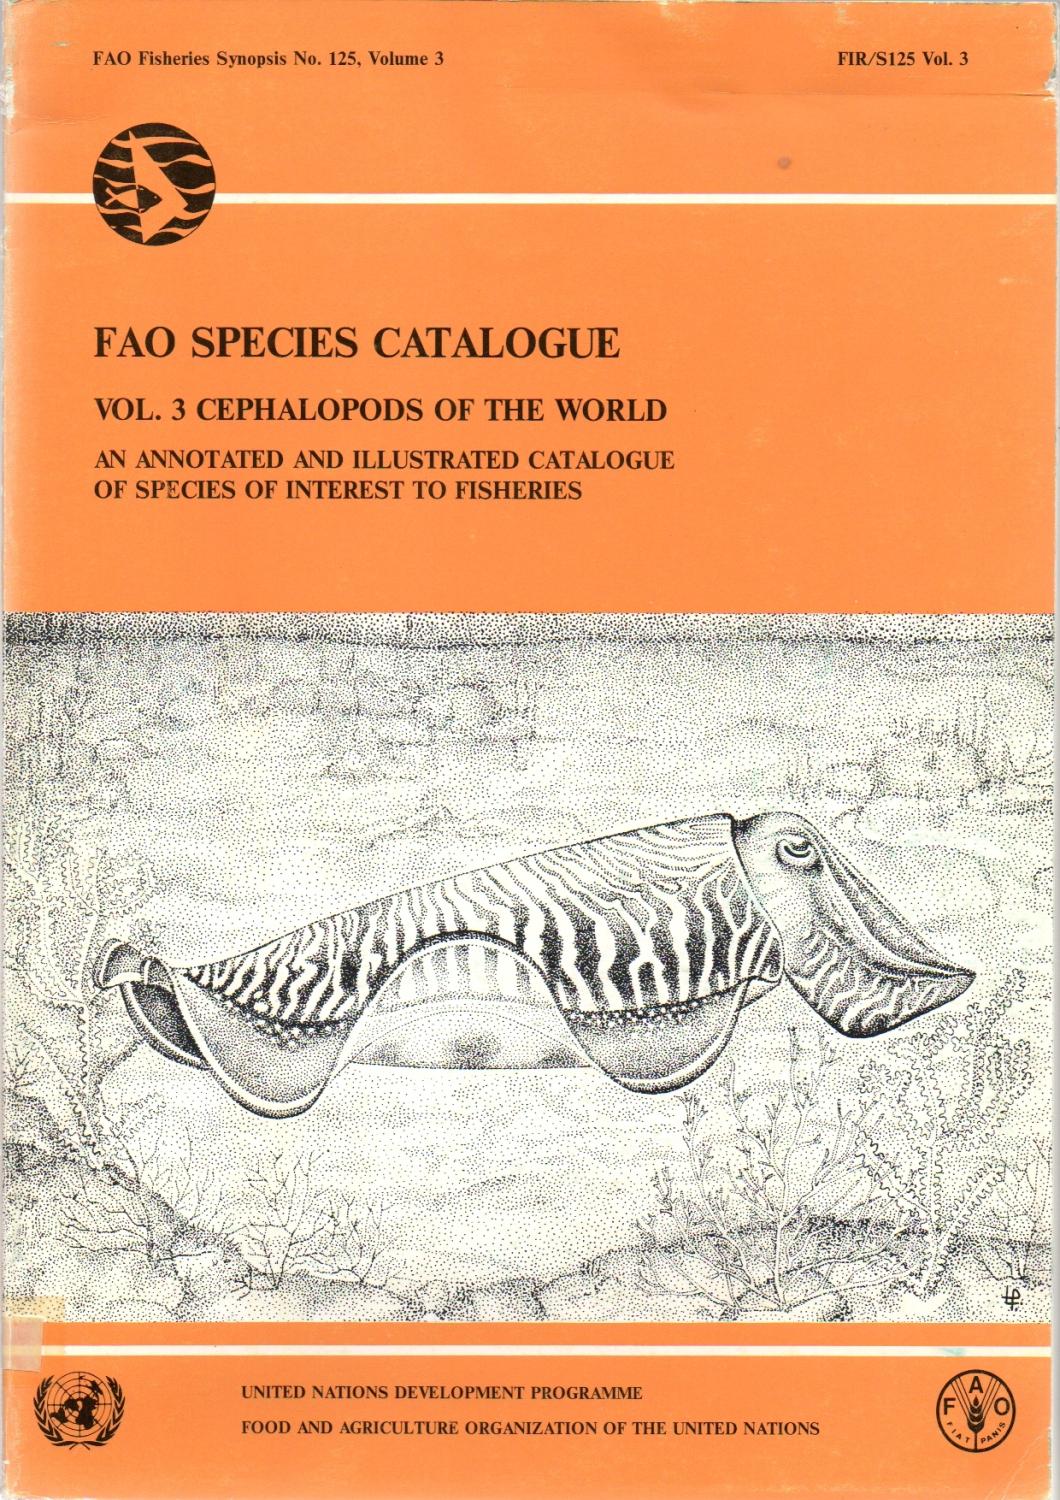 FAO species catalogue. Vol. 3. Cephalopods of the world. An annotated and illustrated catalogue of species of interest to fisheries.